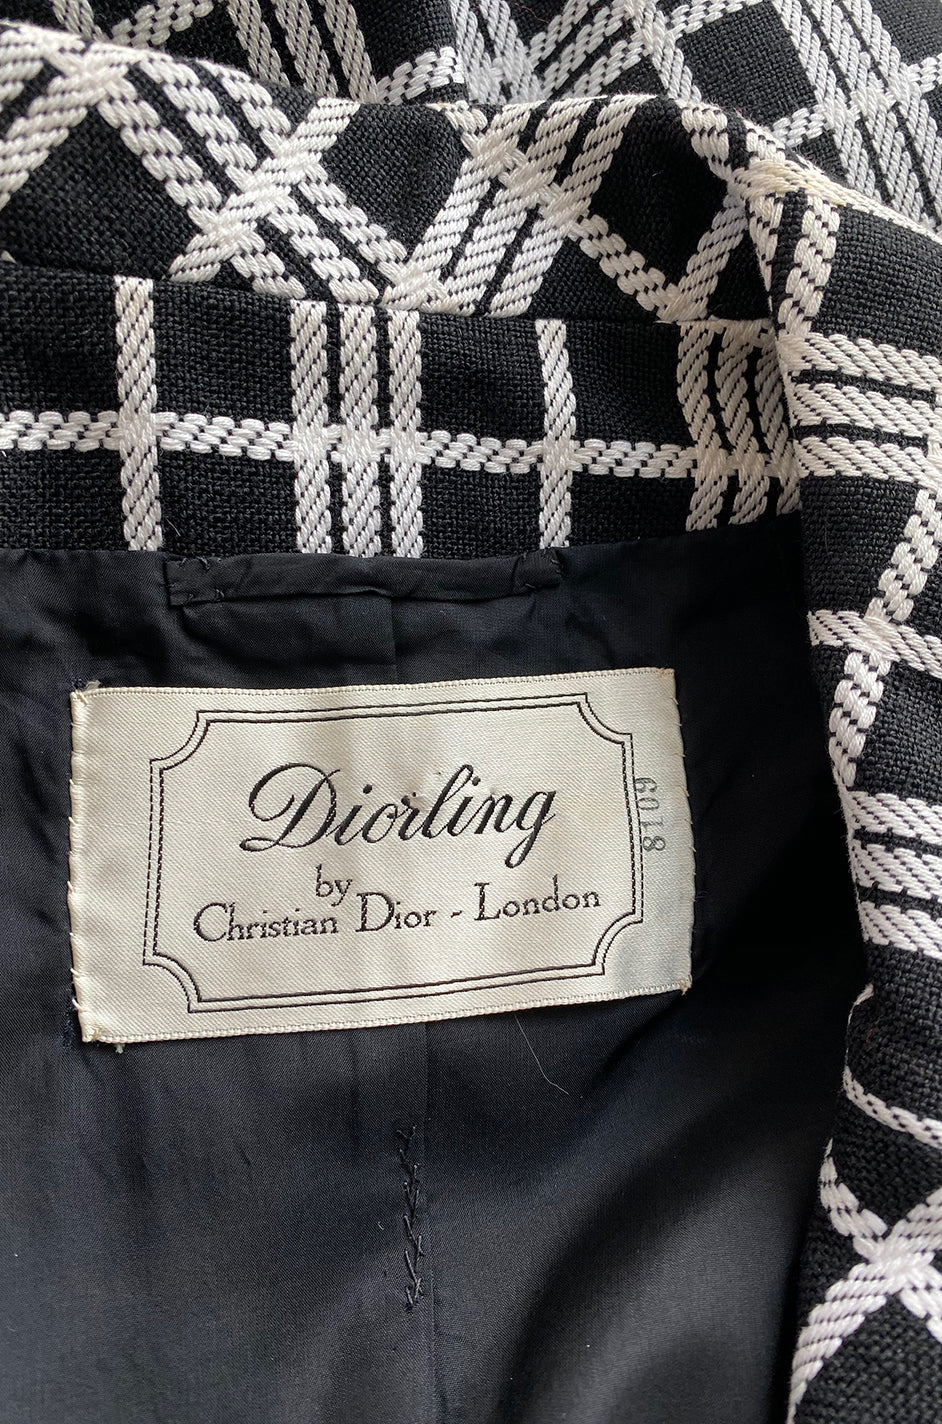 Spring 1970 Diorling by Christian Dior Numbered Mod Black & White Chec ...